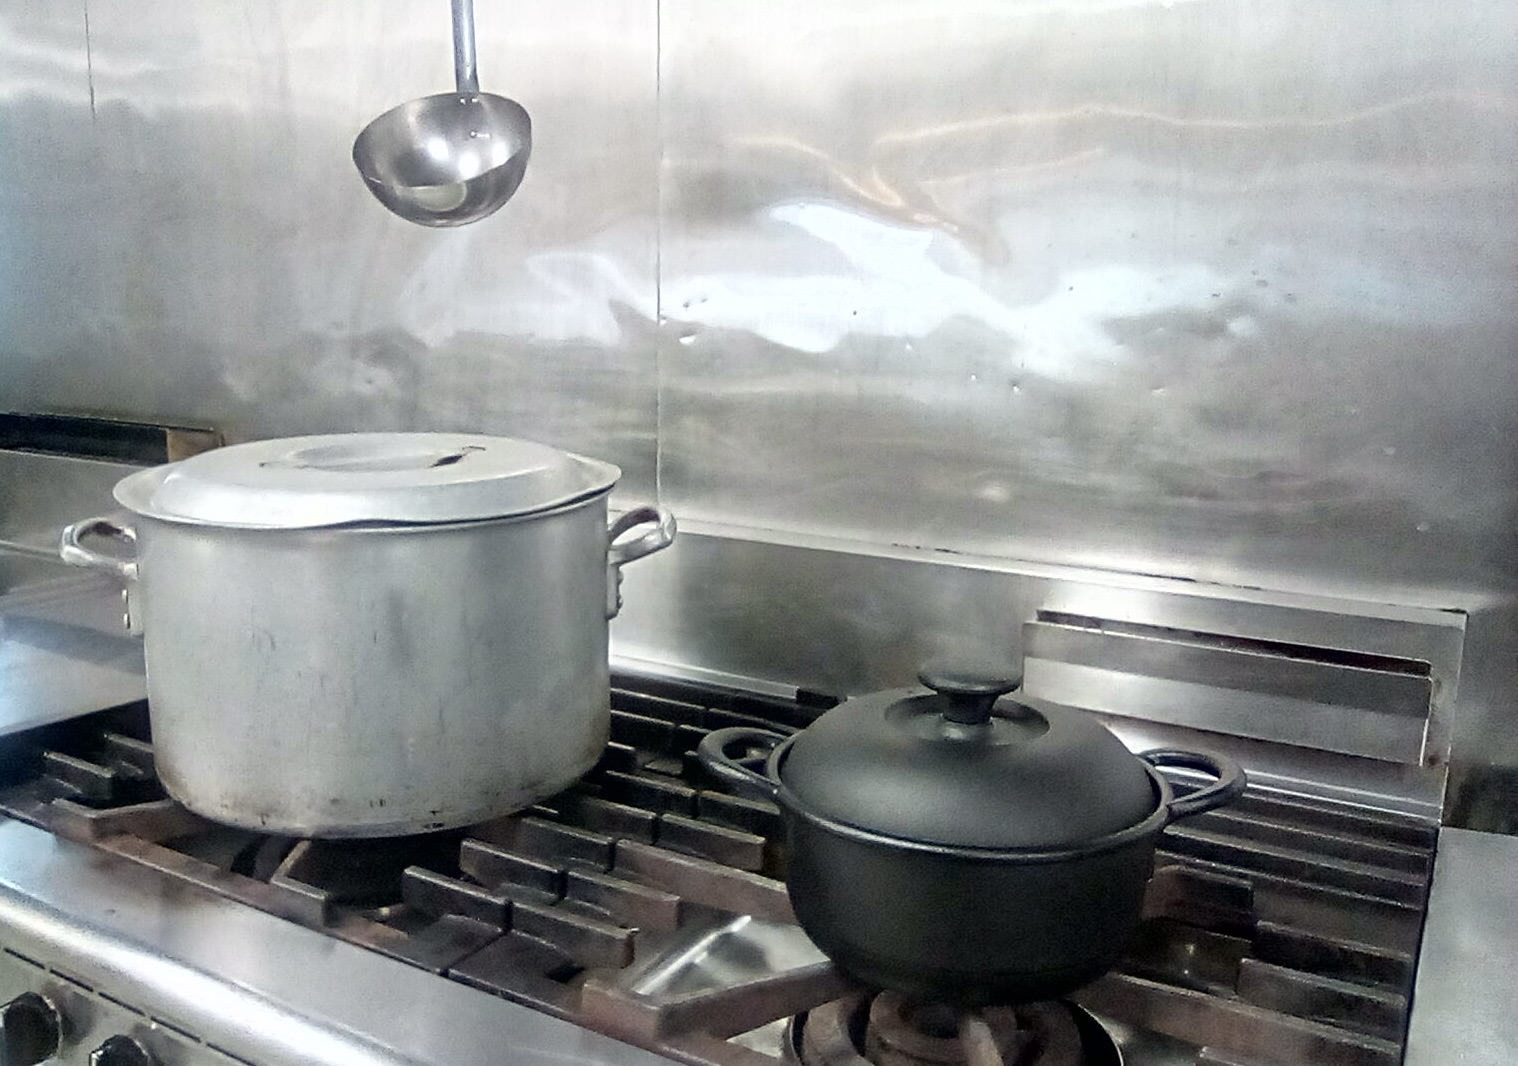 https://www.booniehicks.com/wp-content/uploads/2021/03/Stockpot-and-Dutch-Oven-on-stove.jpg